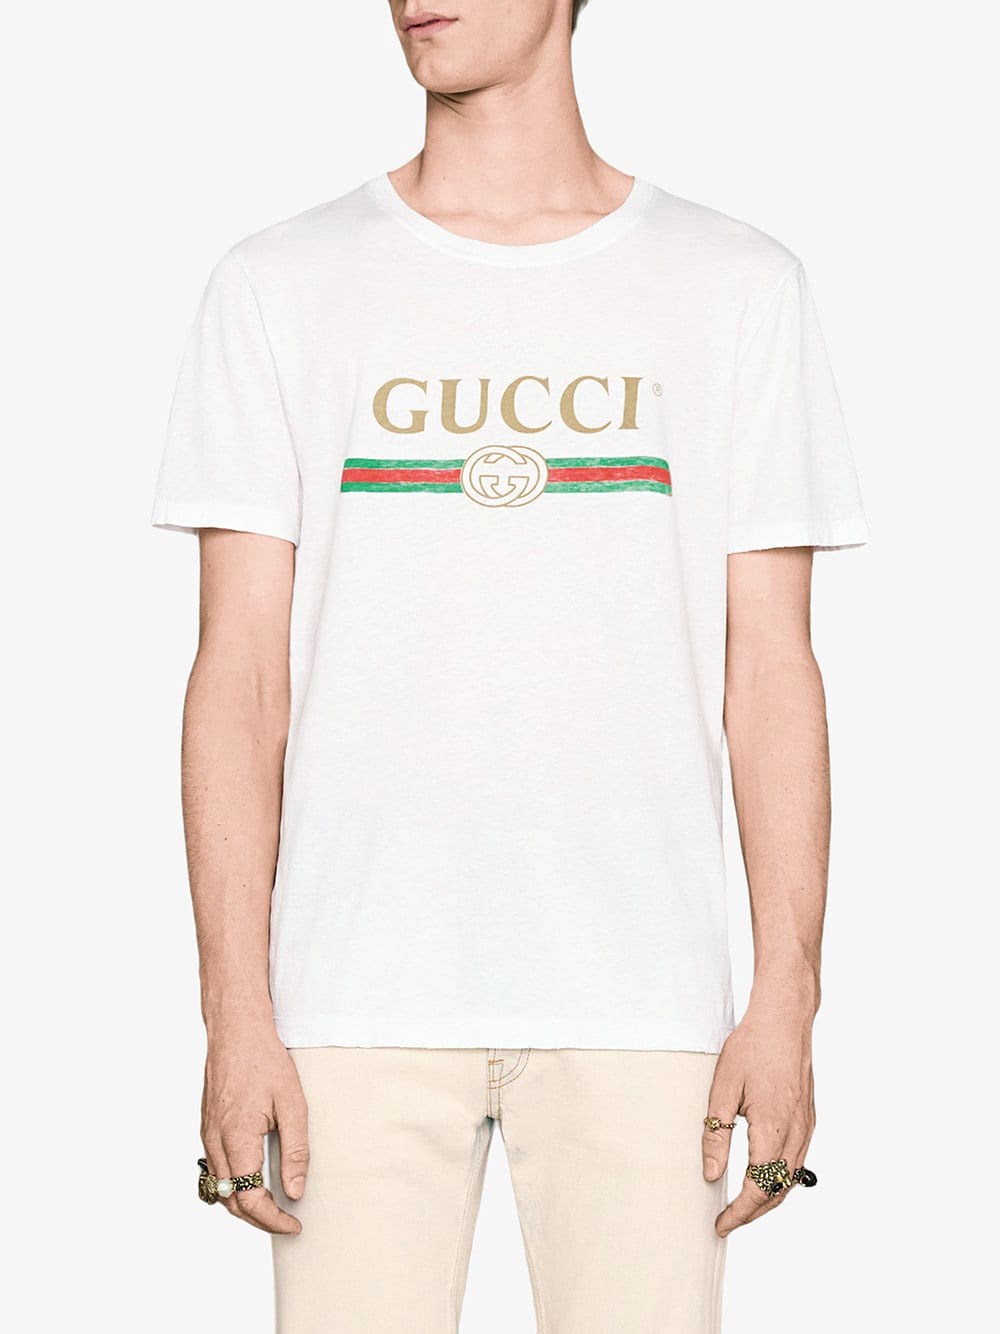 gucci t shirt with holes